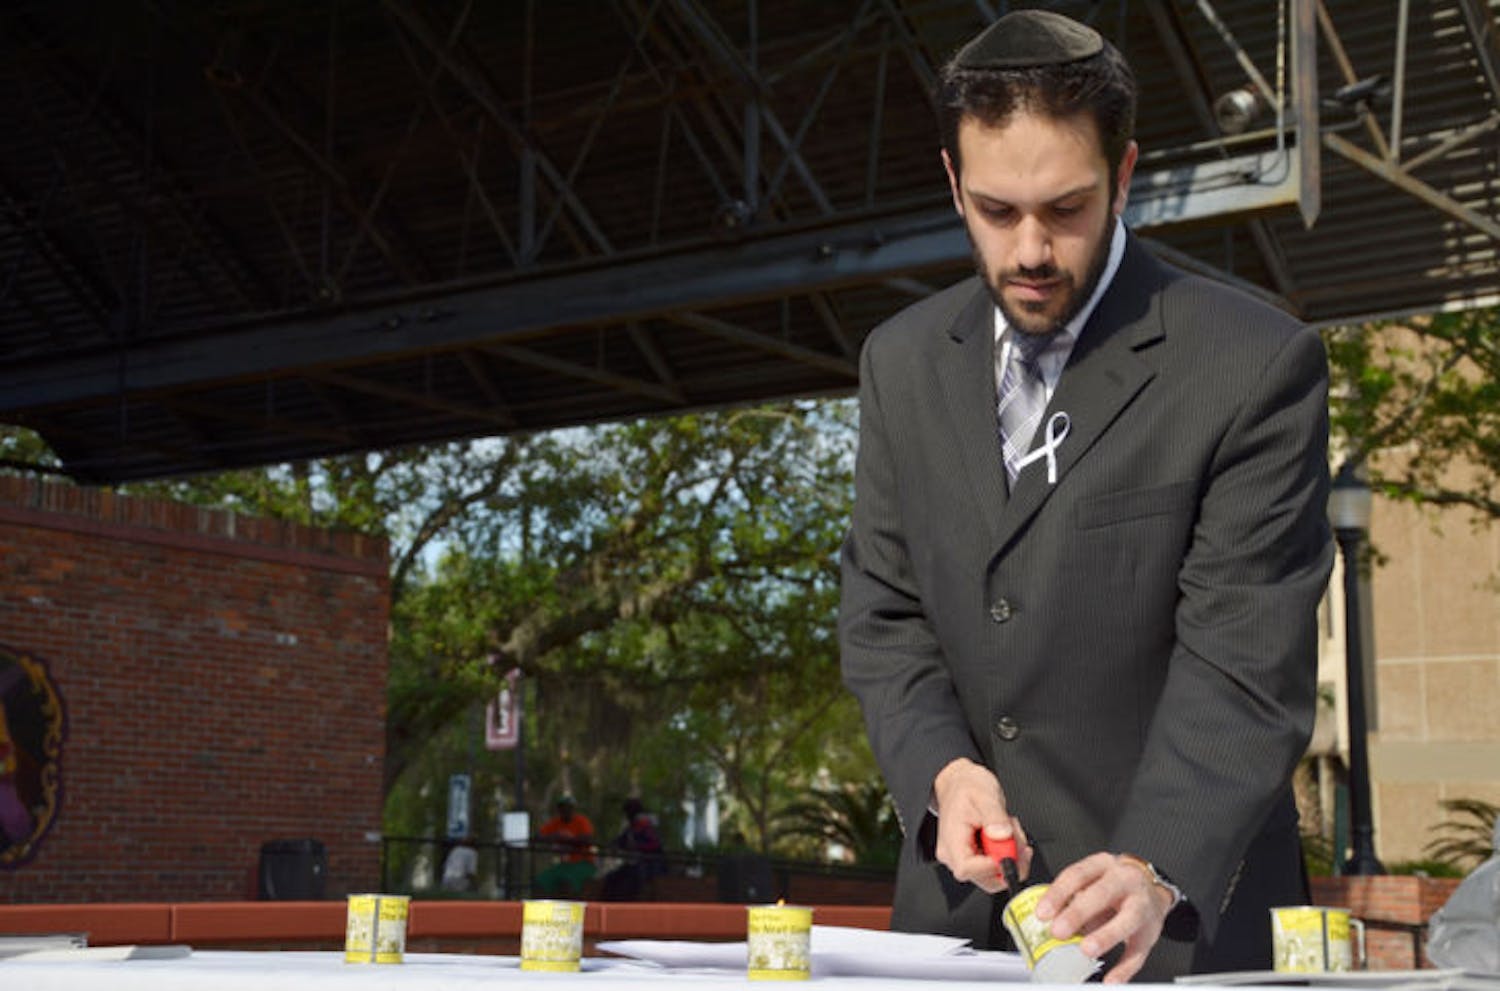 Rabbi Daniel Wolnerman, of UF Hillel, lights a candle at a memorial ceremony commemorating genocide victims on Bo Diddley Community Plaza on Sunday. April is Genocide Awareness Month.